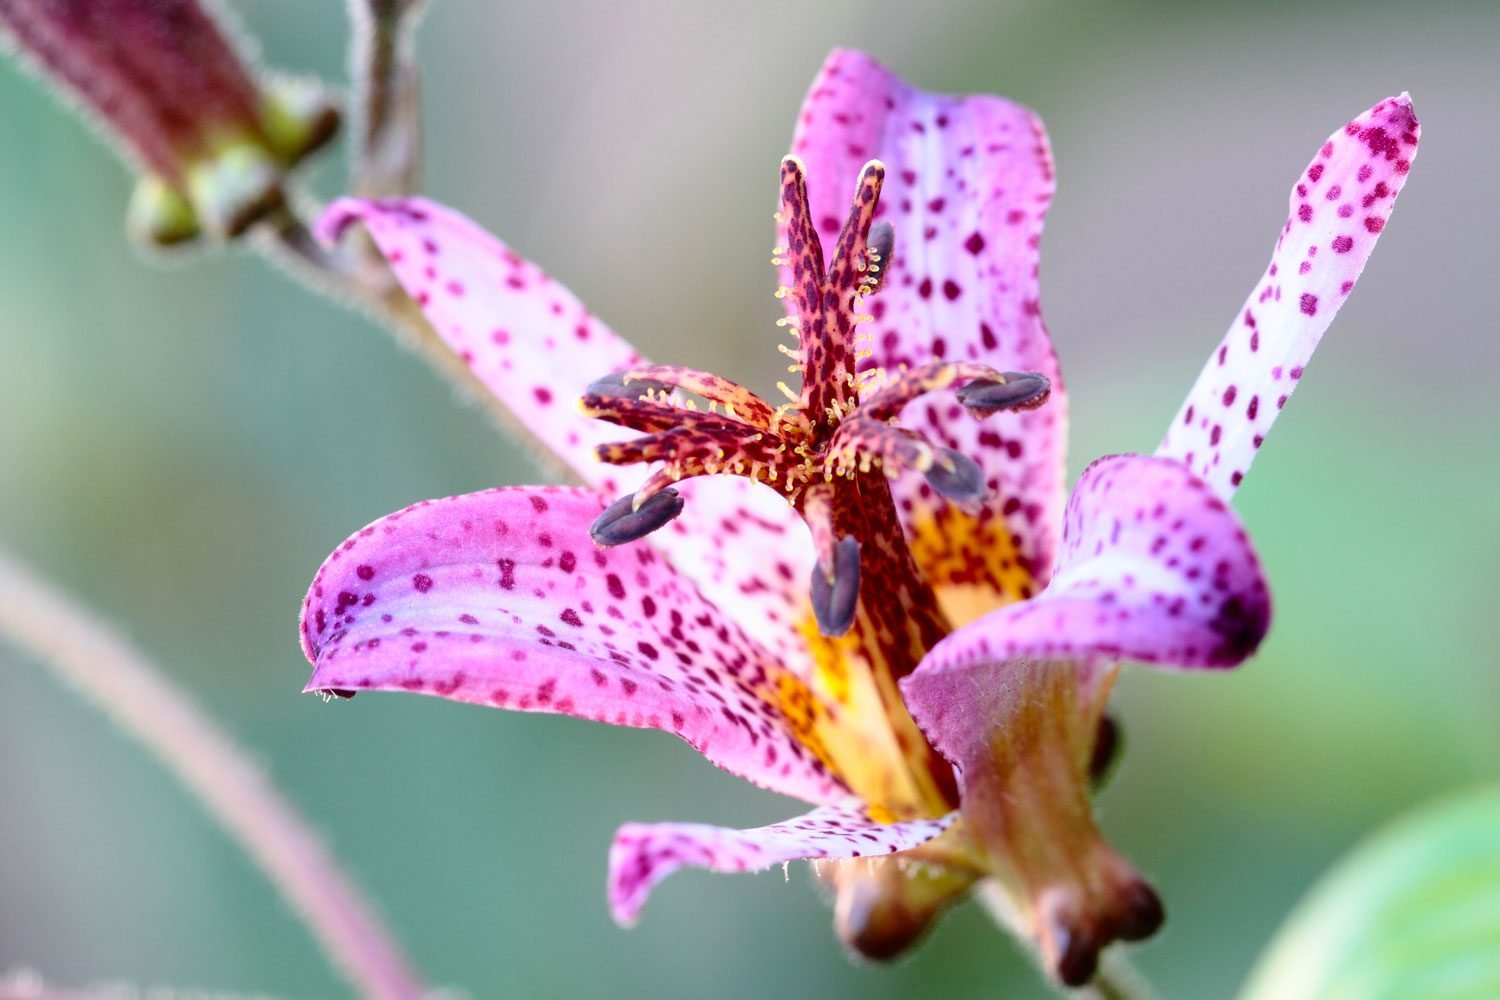 Toad Lily pictured in a luscious green forest in an out of focus background